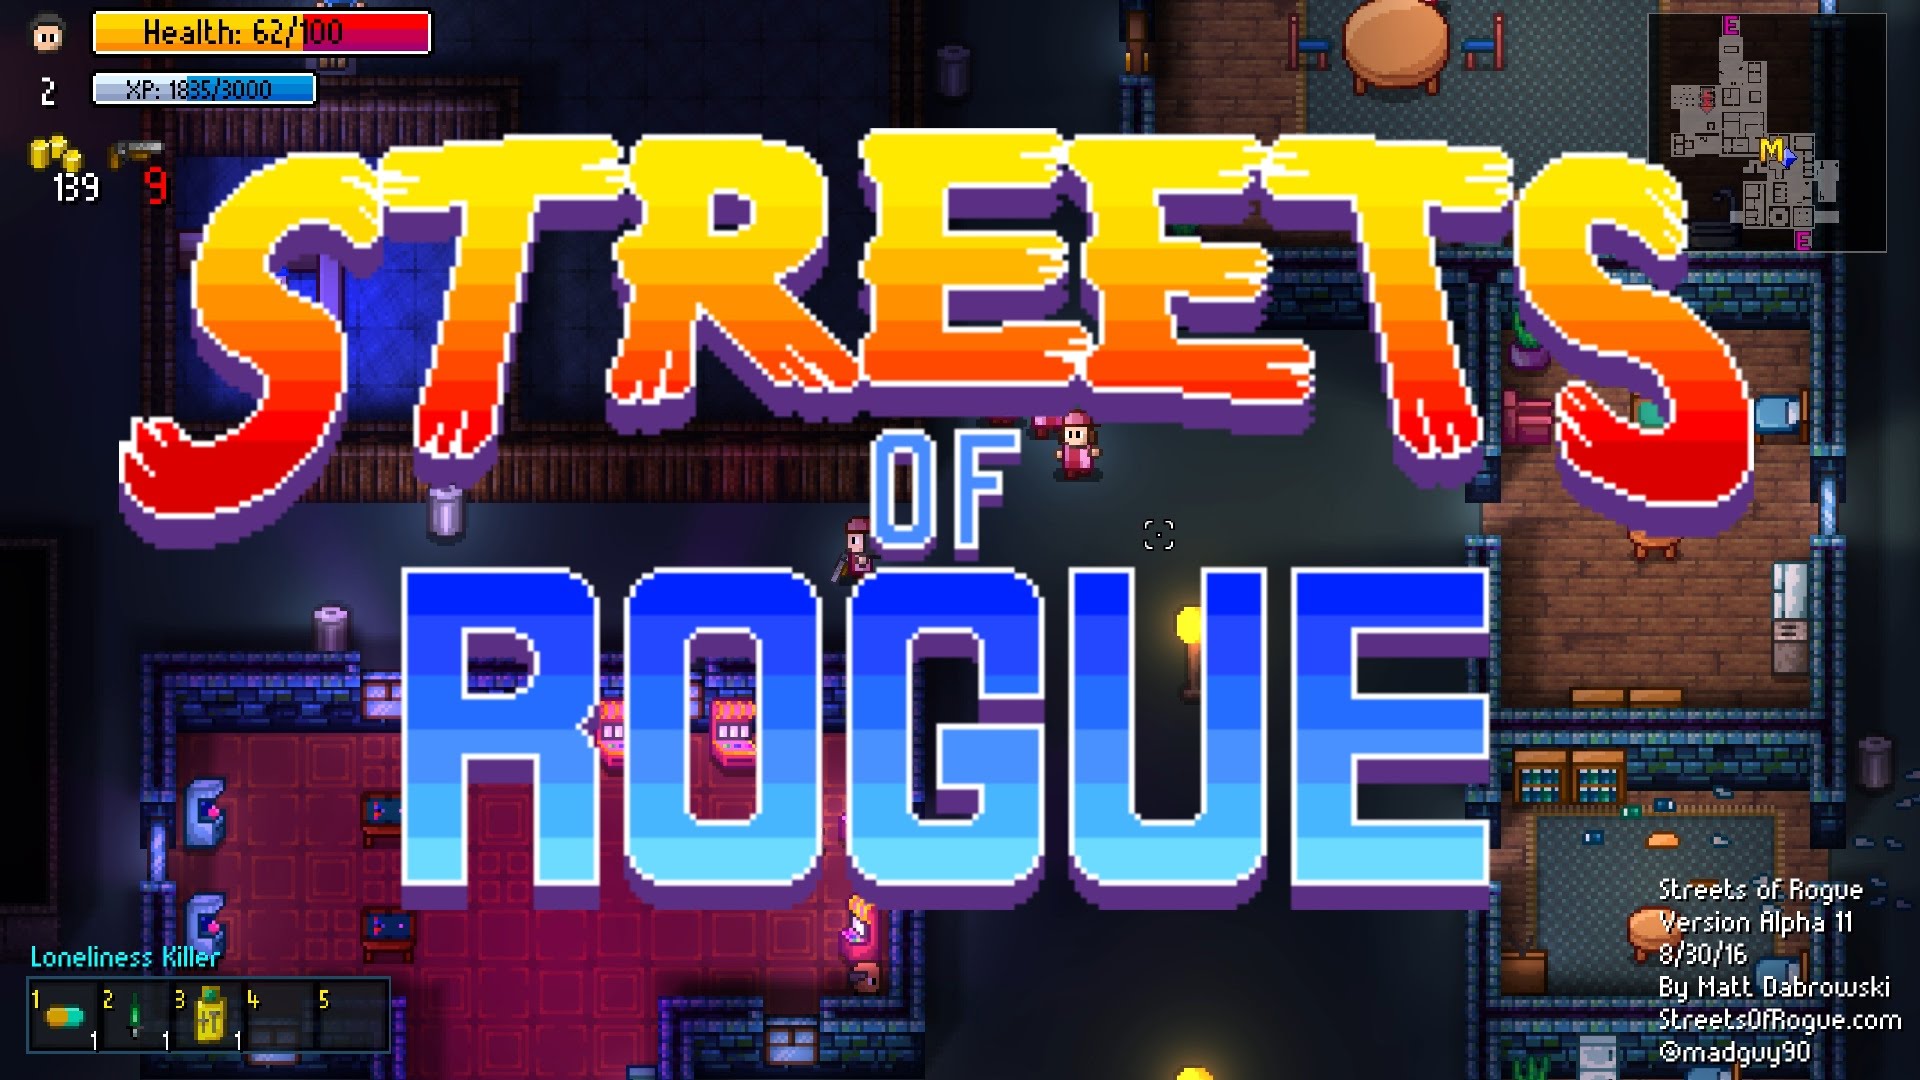 Streets Of Rogue Backgrounds, Compatible - PC, Mobile, Gadgets| 1920x1080 px